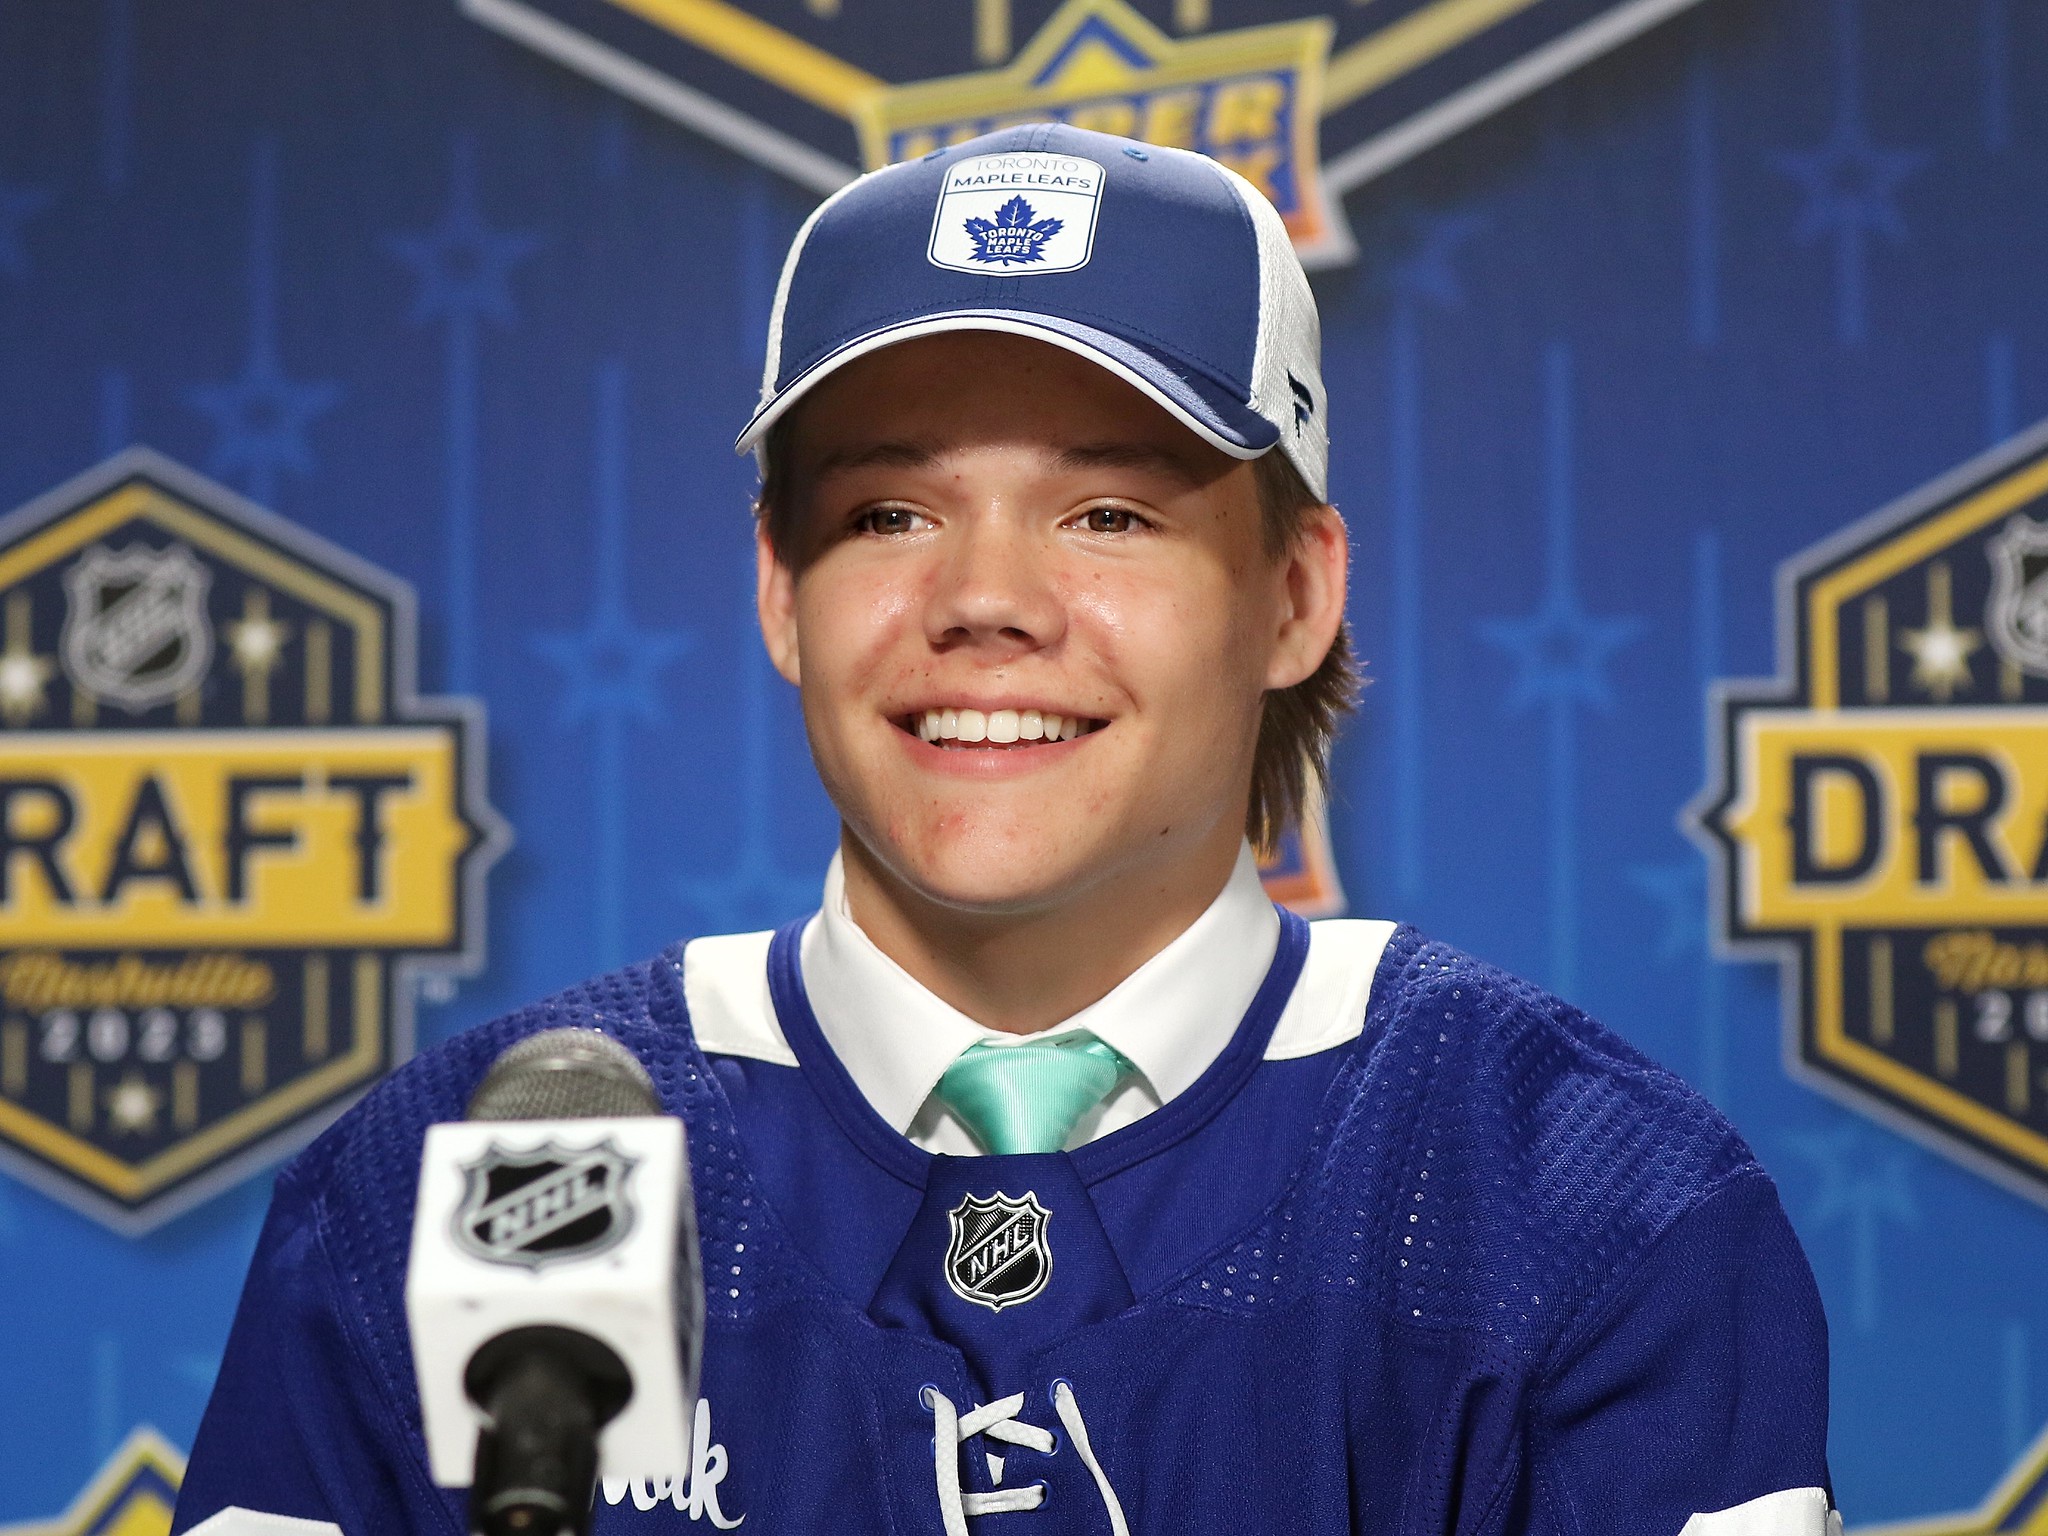 Maple Leafs’ Cowan Quickly Earning ‘Top Prospect’ Label